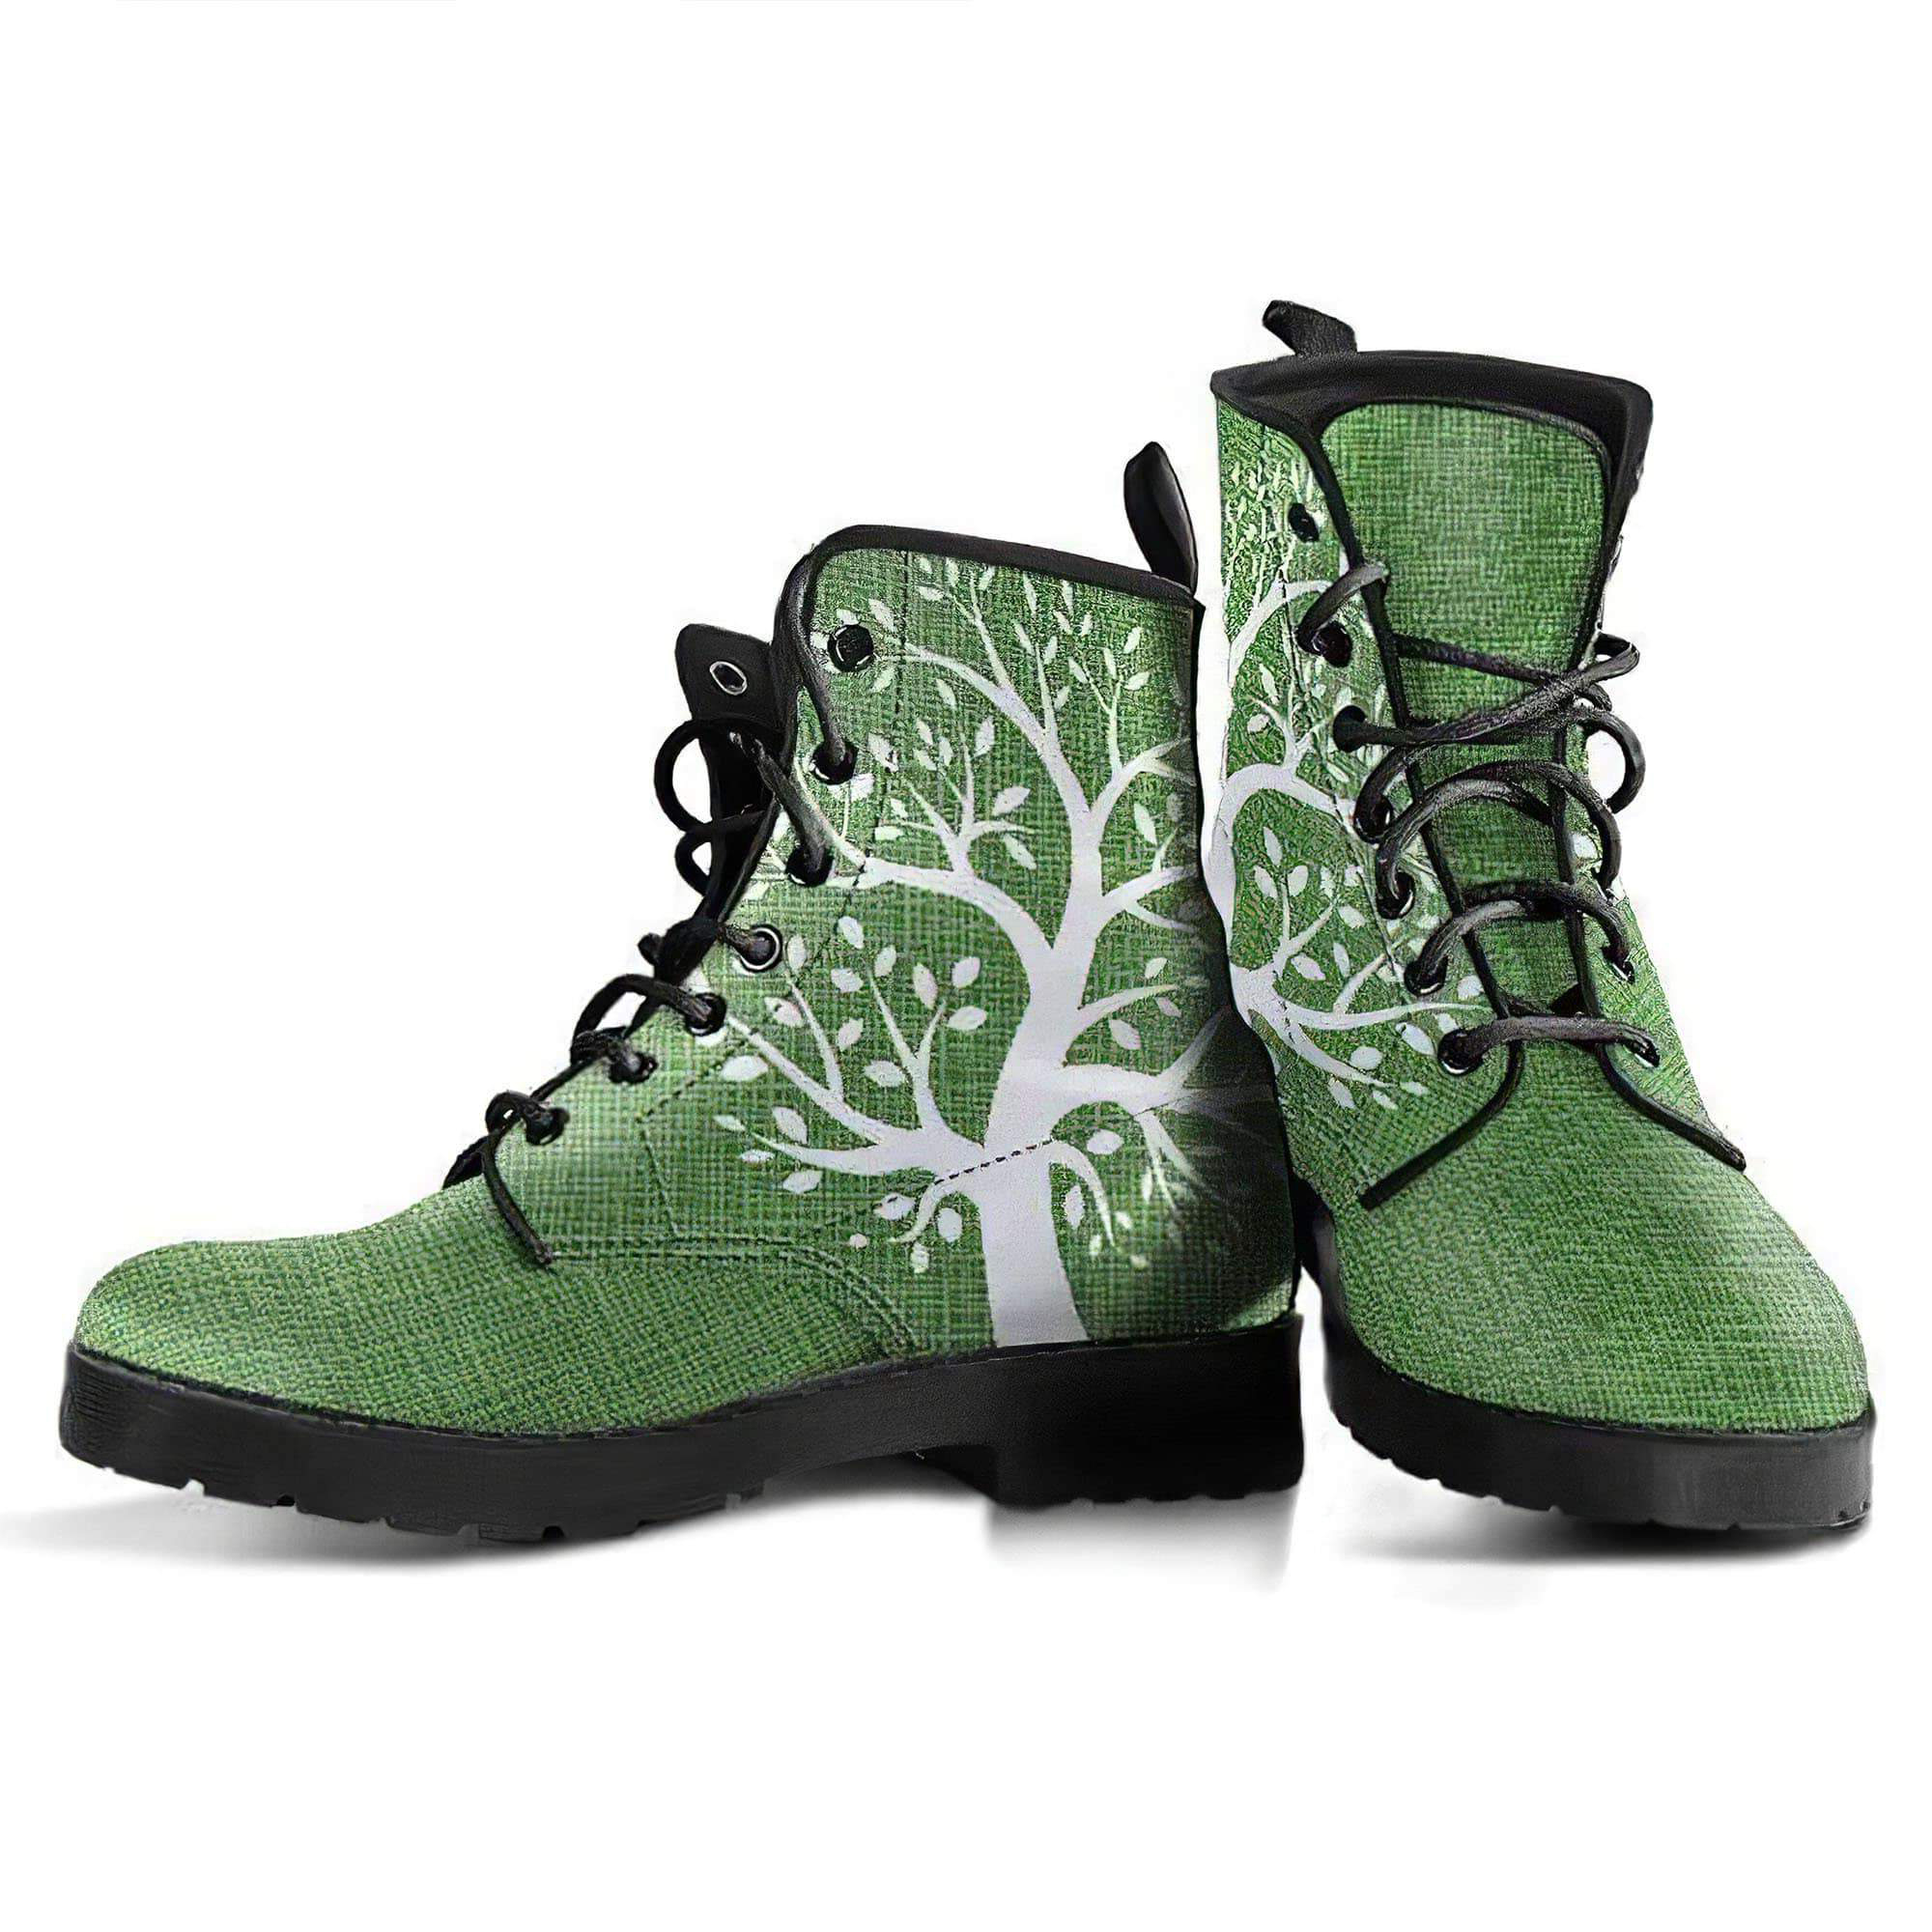 tree-of-life-women-s-leather-boots-women-s-leather-boots-12051968917565.jpg